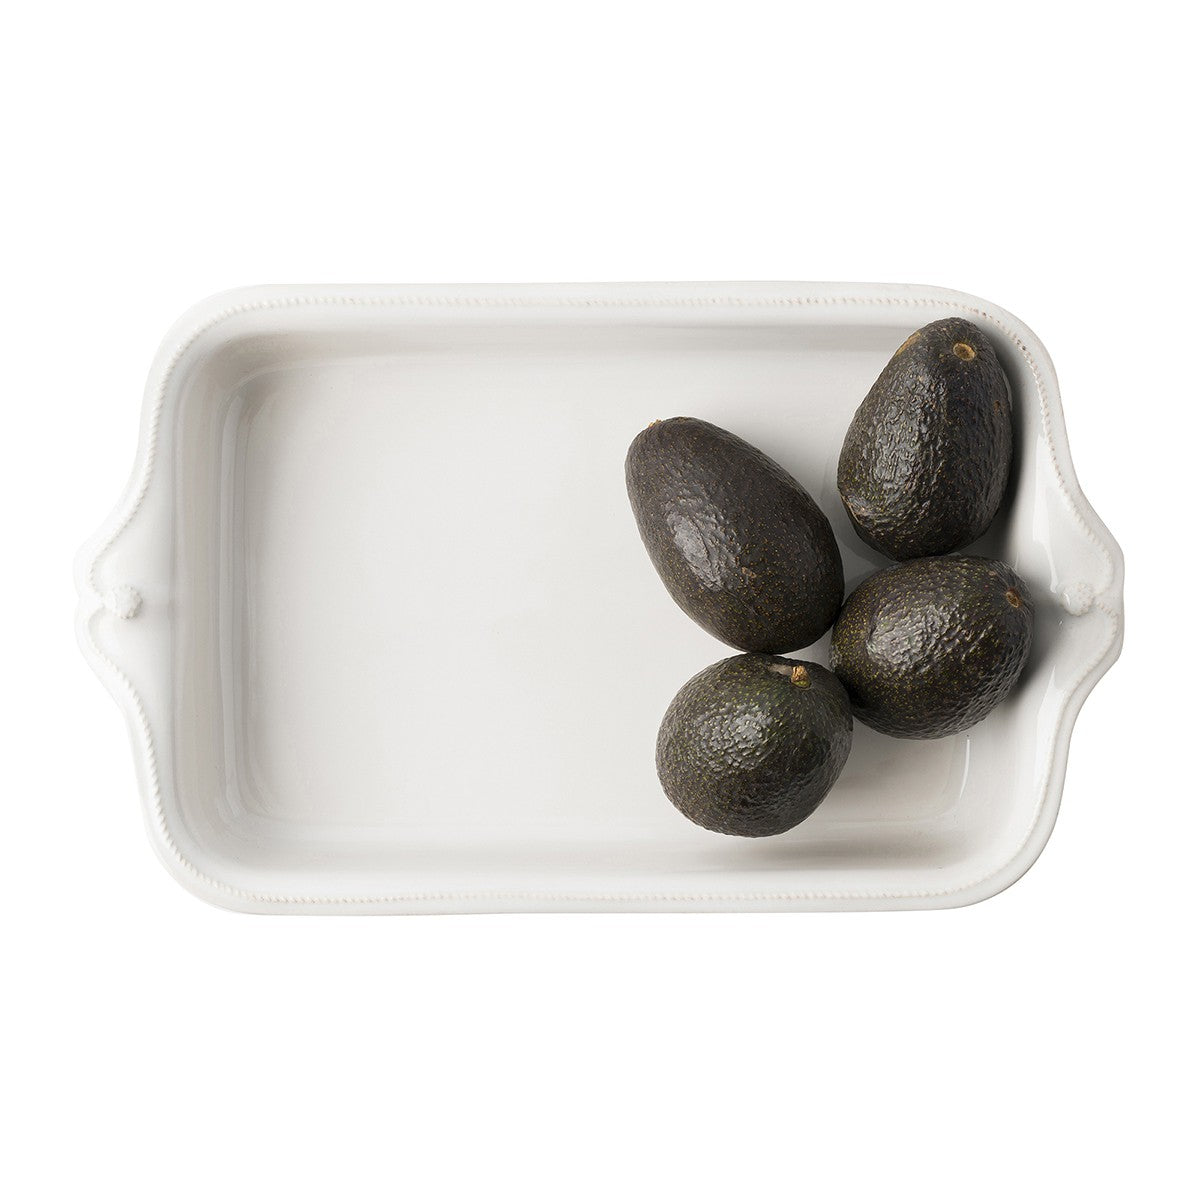 top view of berry and thread rectangle baking dish with avocados on a white background